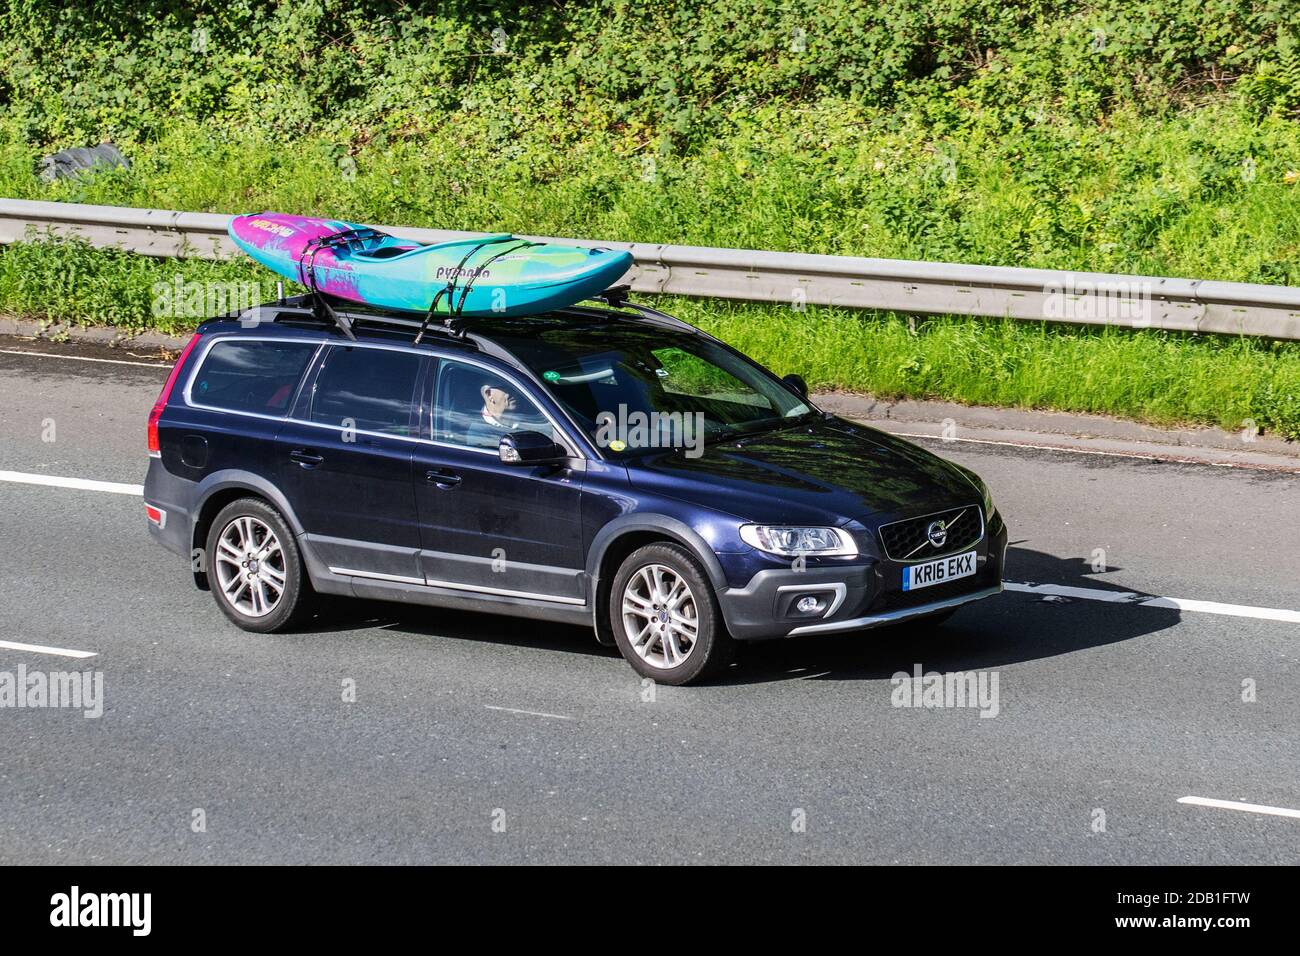 2016 Volvo Xc70 SE LUX D5 AWD Auto; Vehicular traffic, moving vehicles, cars, vehicle driving on UK roads, motors, motoring on the M6 motorway highway UK road network. Stock Photo